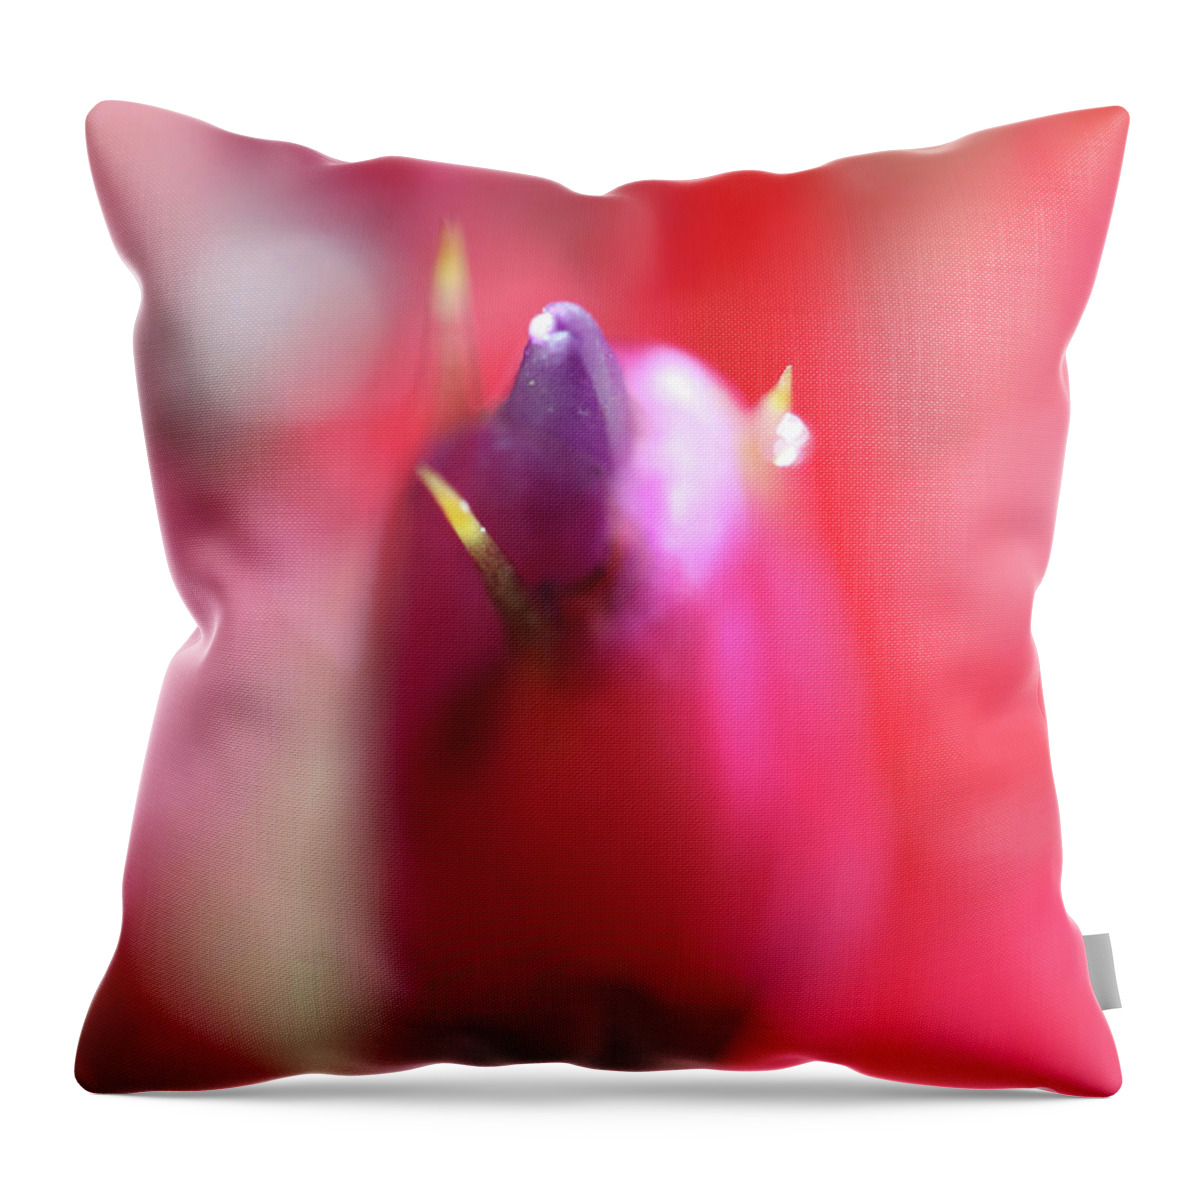 Red Throw Pillow featuring the photograph Up Close and Personal Bud by D Lee